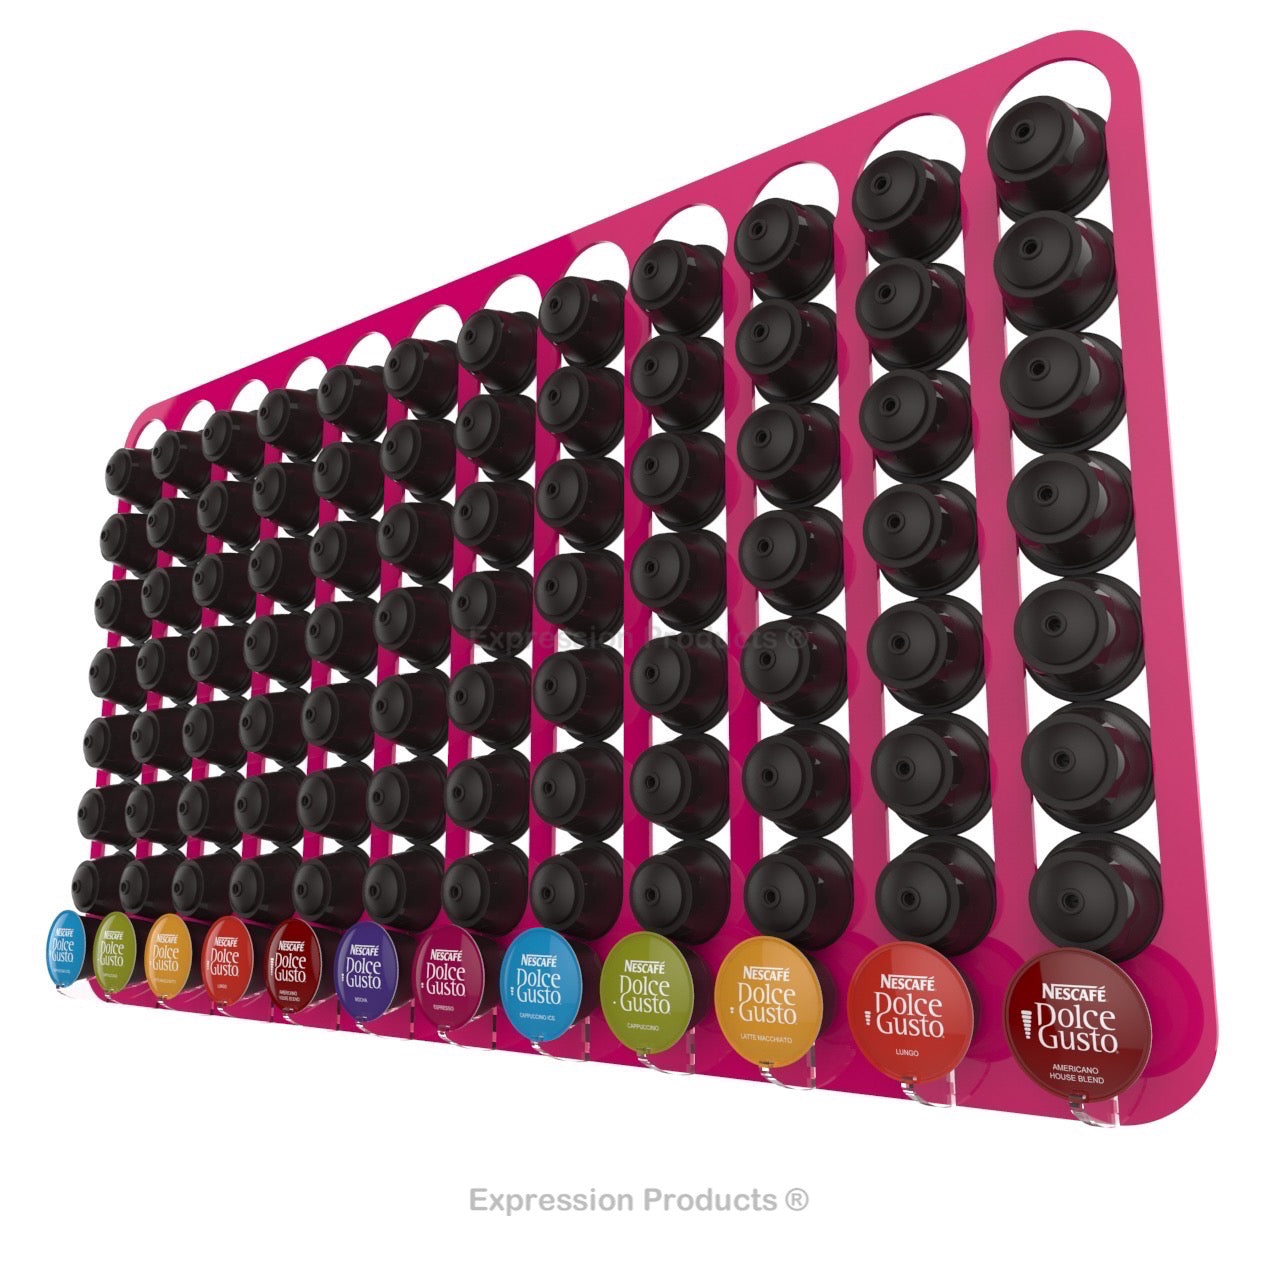 Dolce Gusto Coffee Pod Holder, Wall Mounted.  Shown in Pink Holding 96 Pods